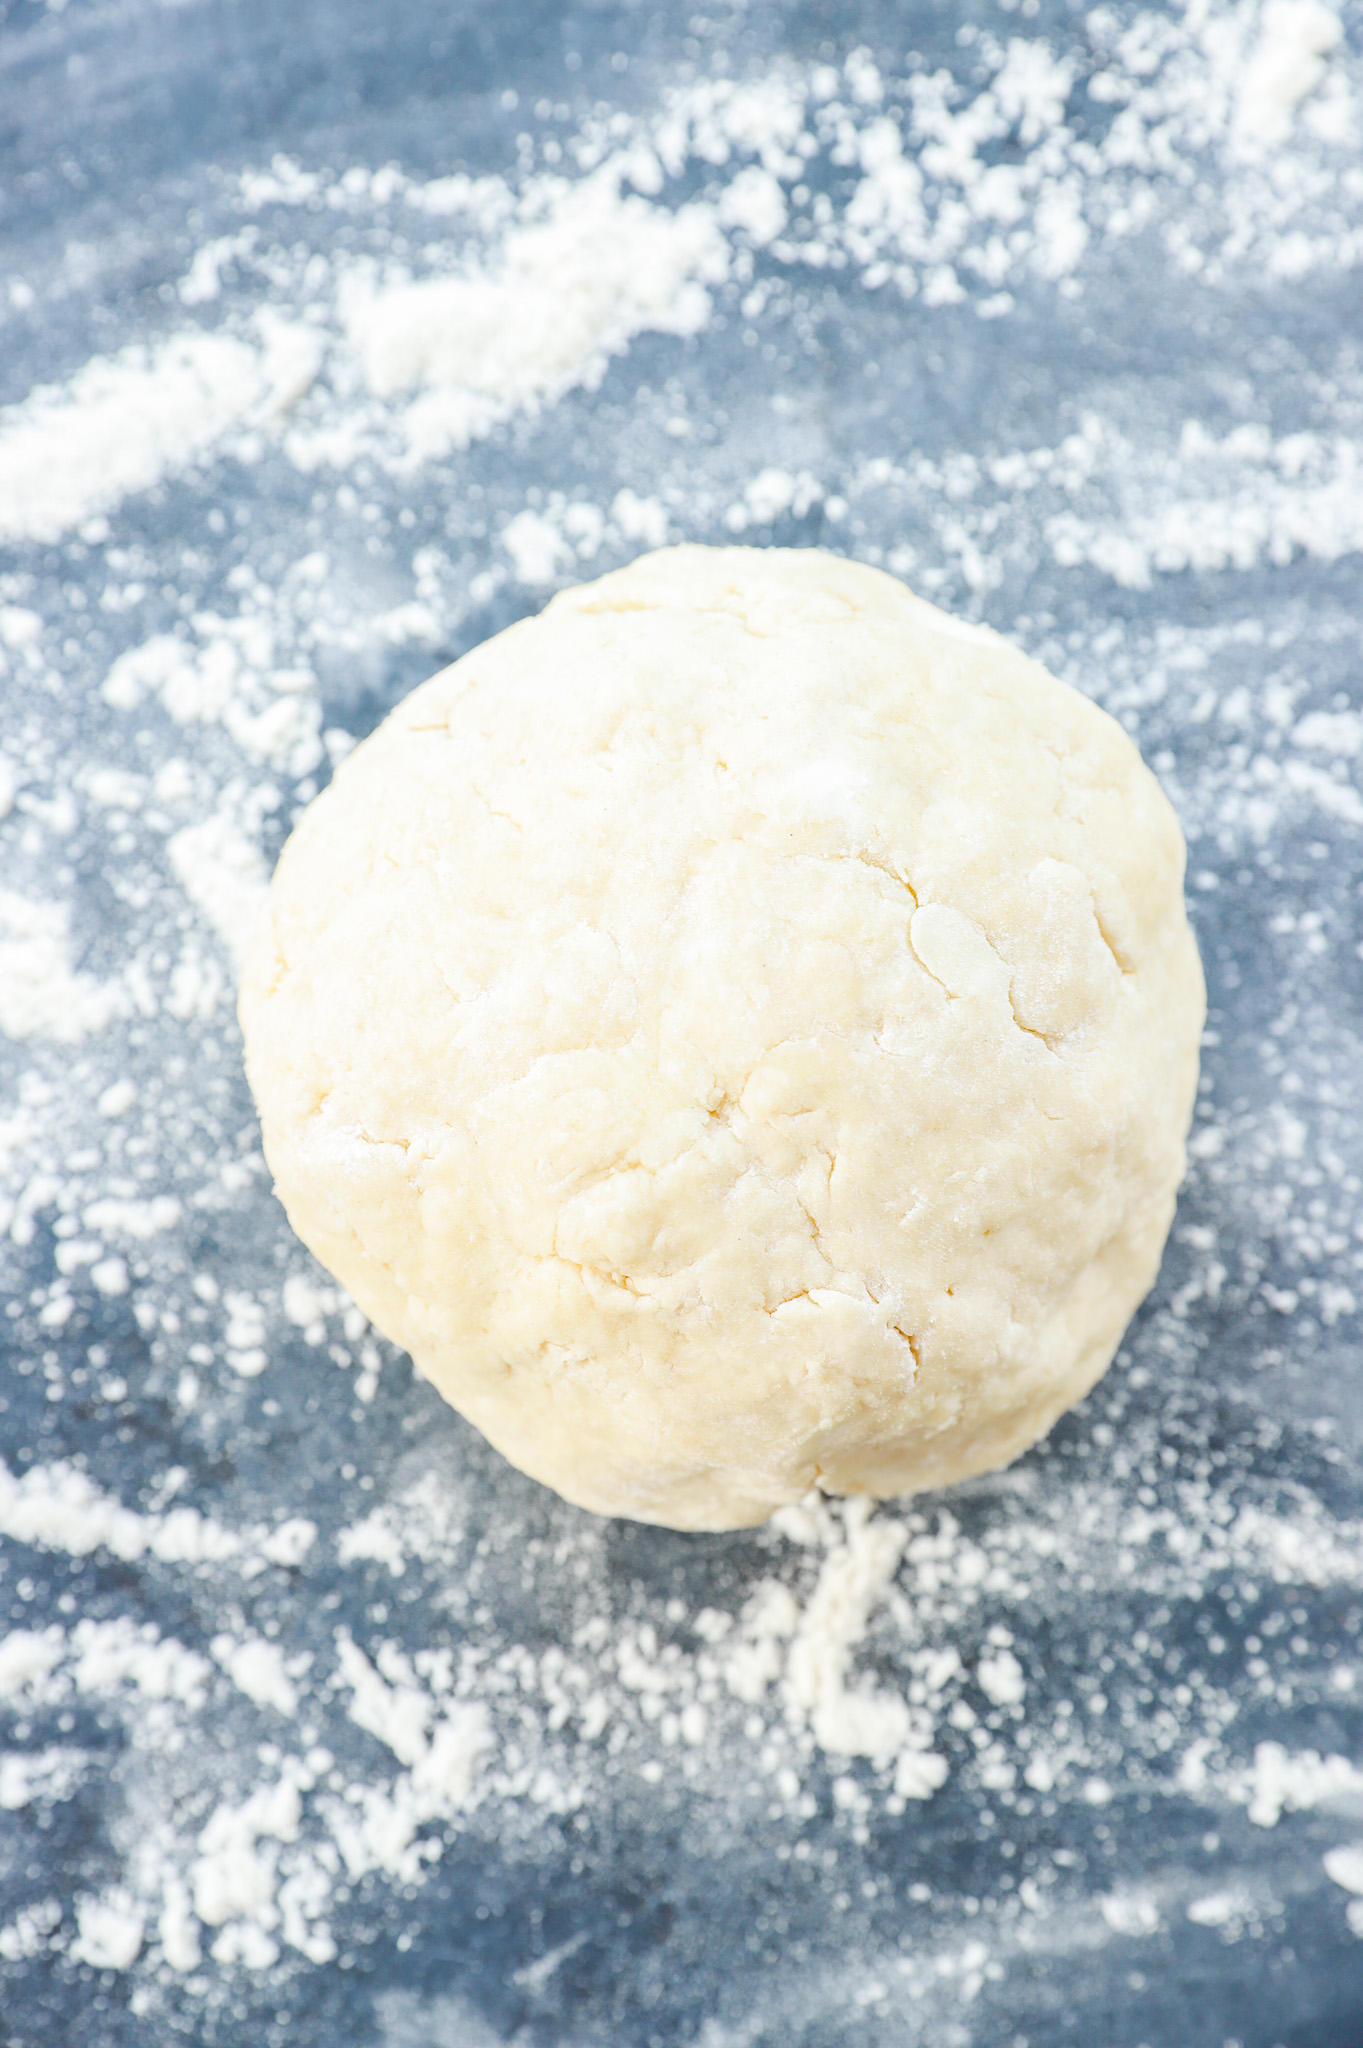 Biscuit dough before baking and rolling